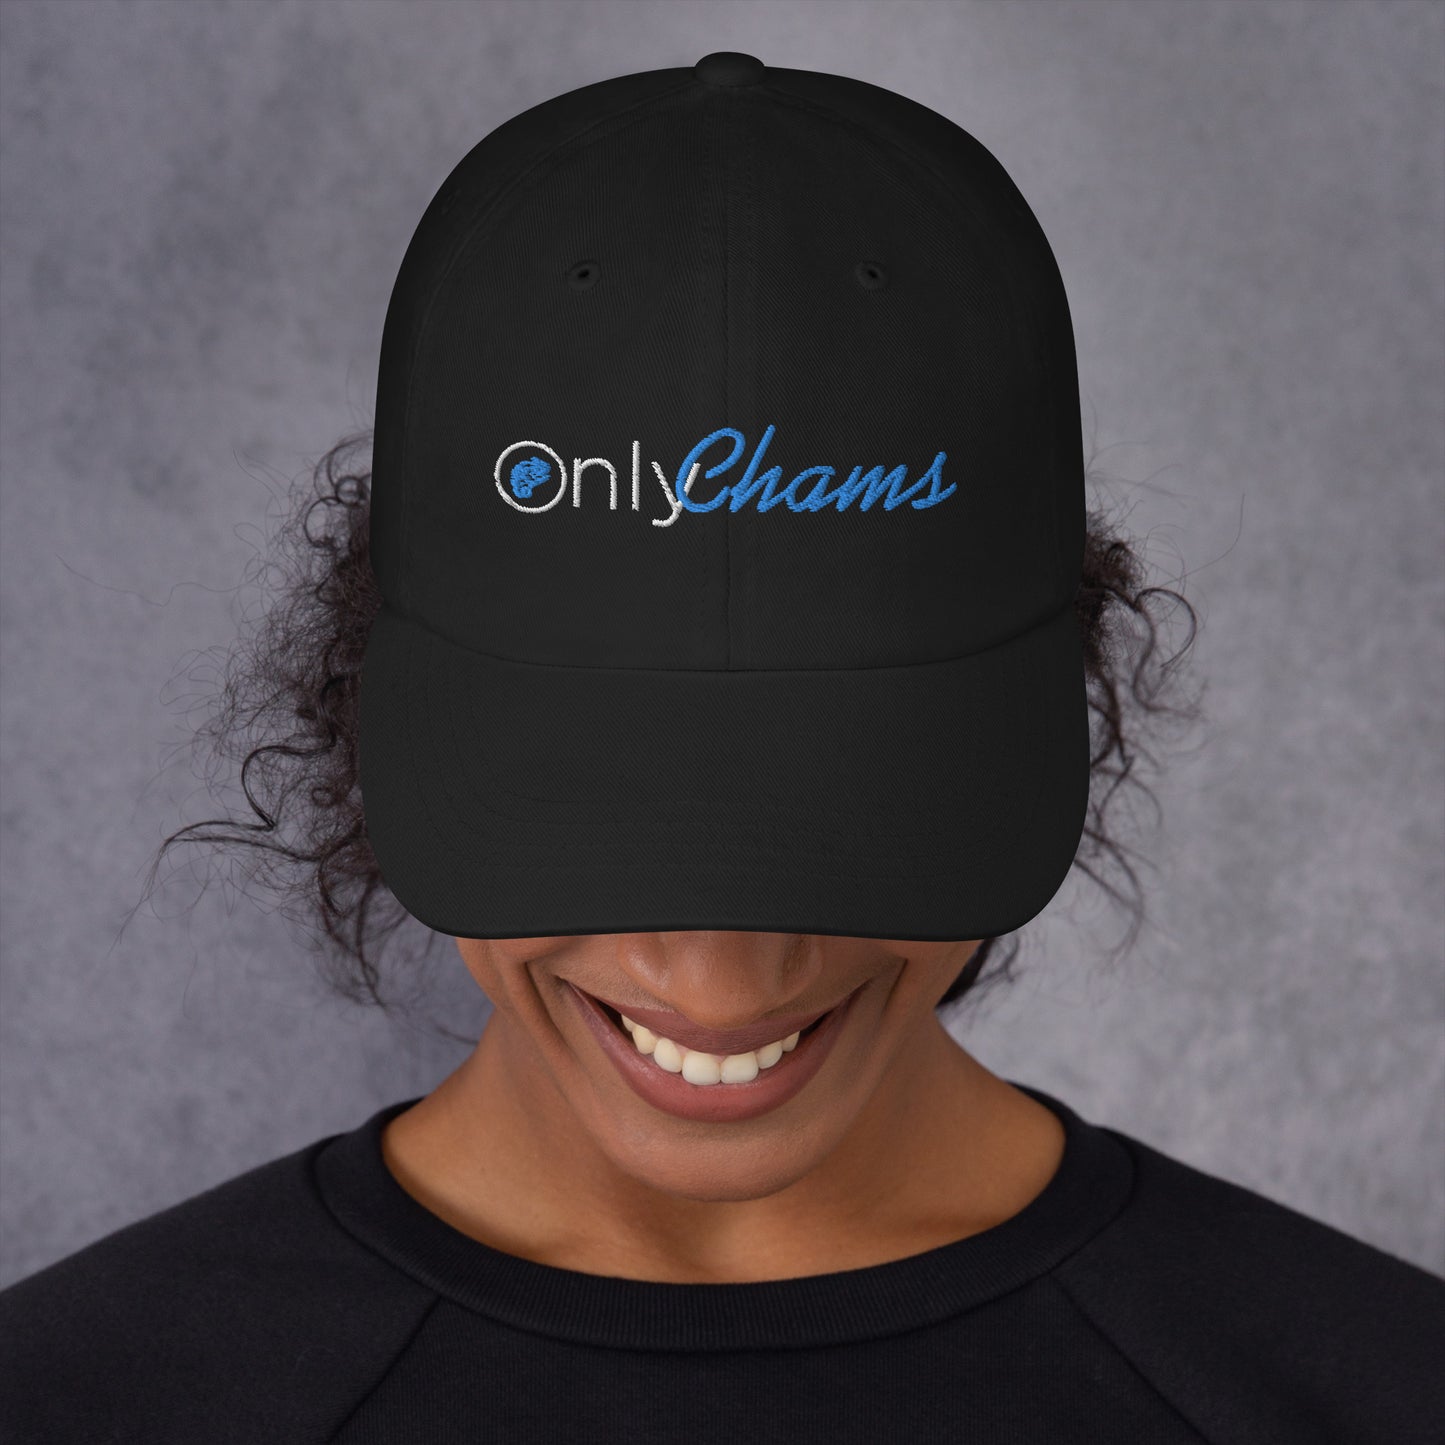 OnlyChams Dad hat